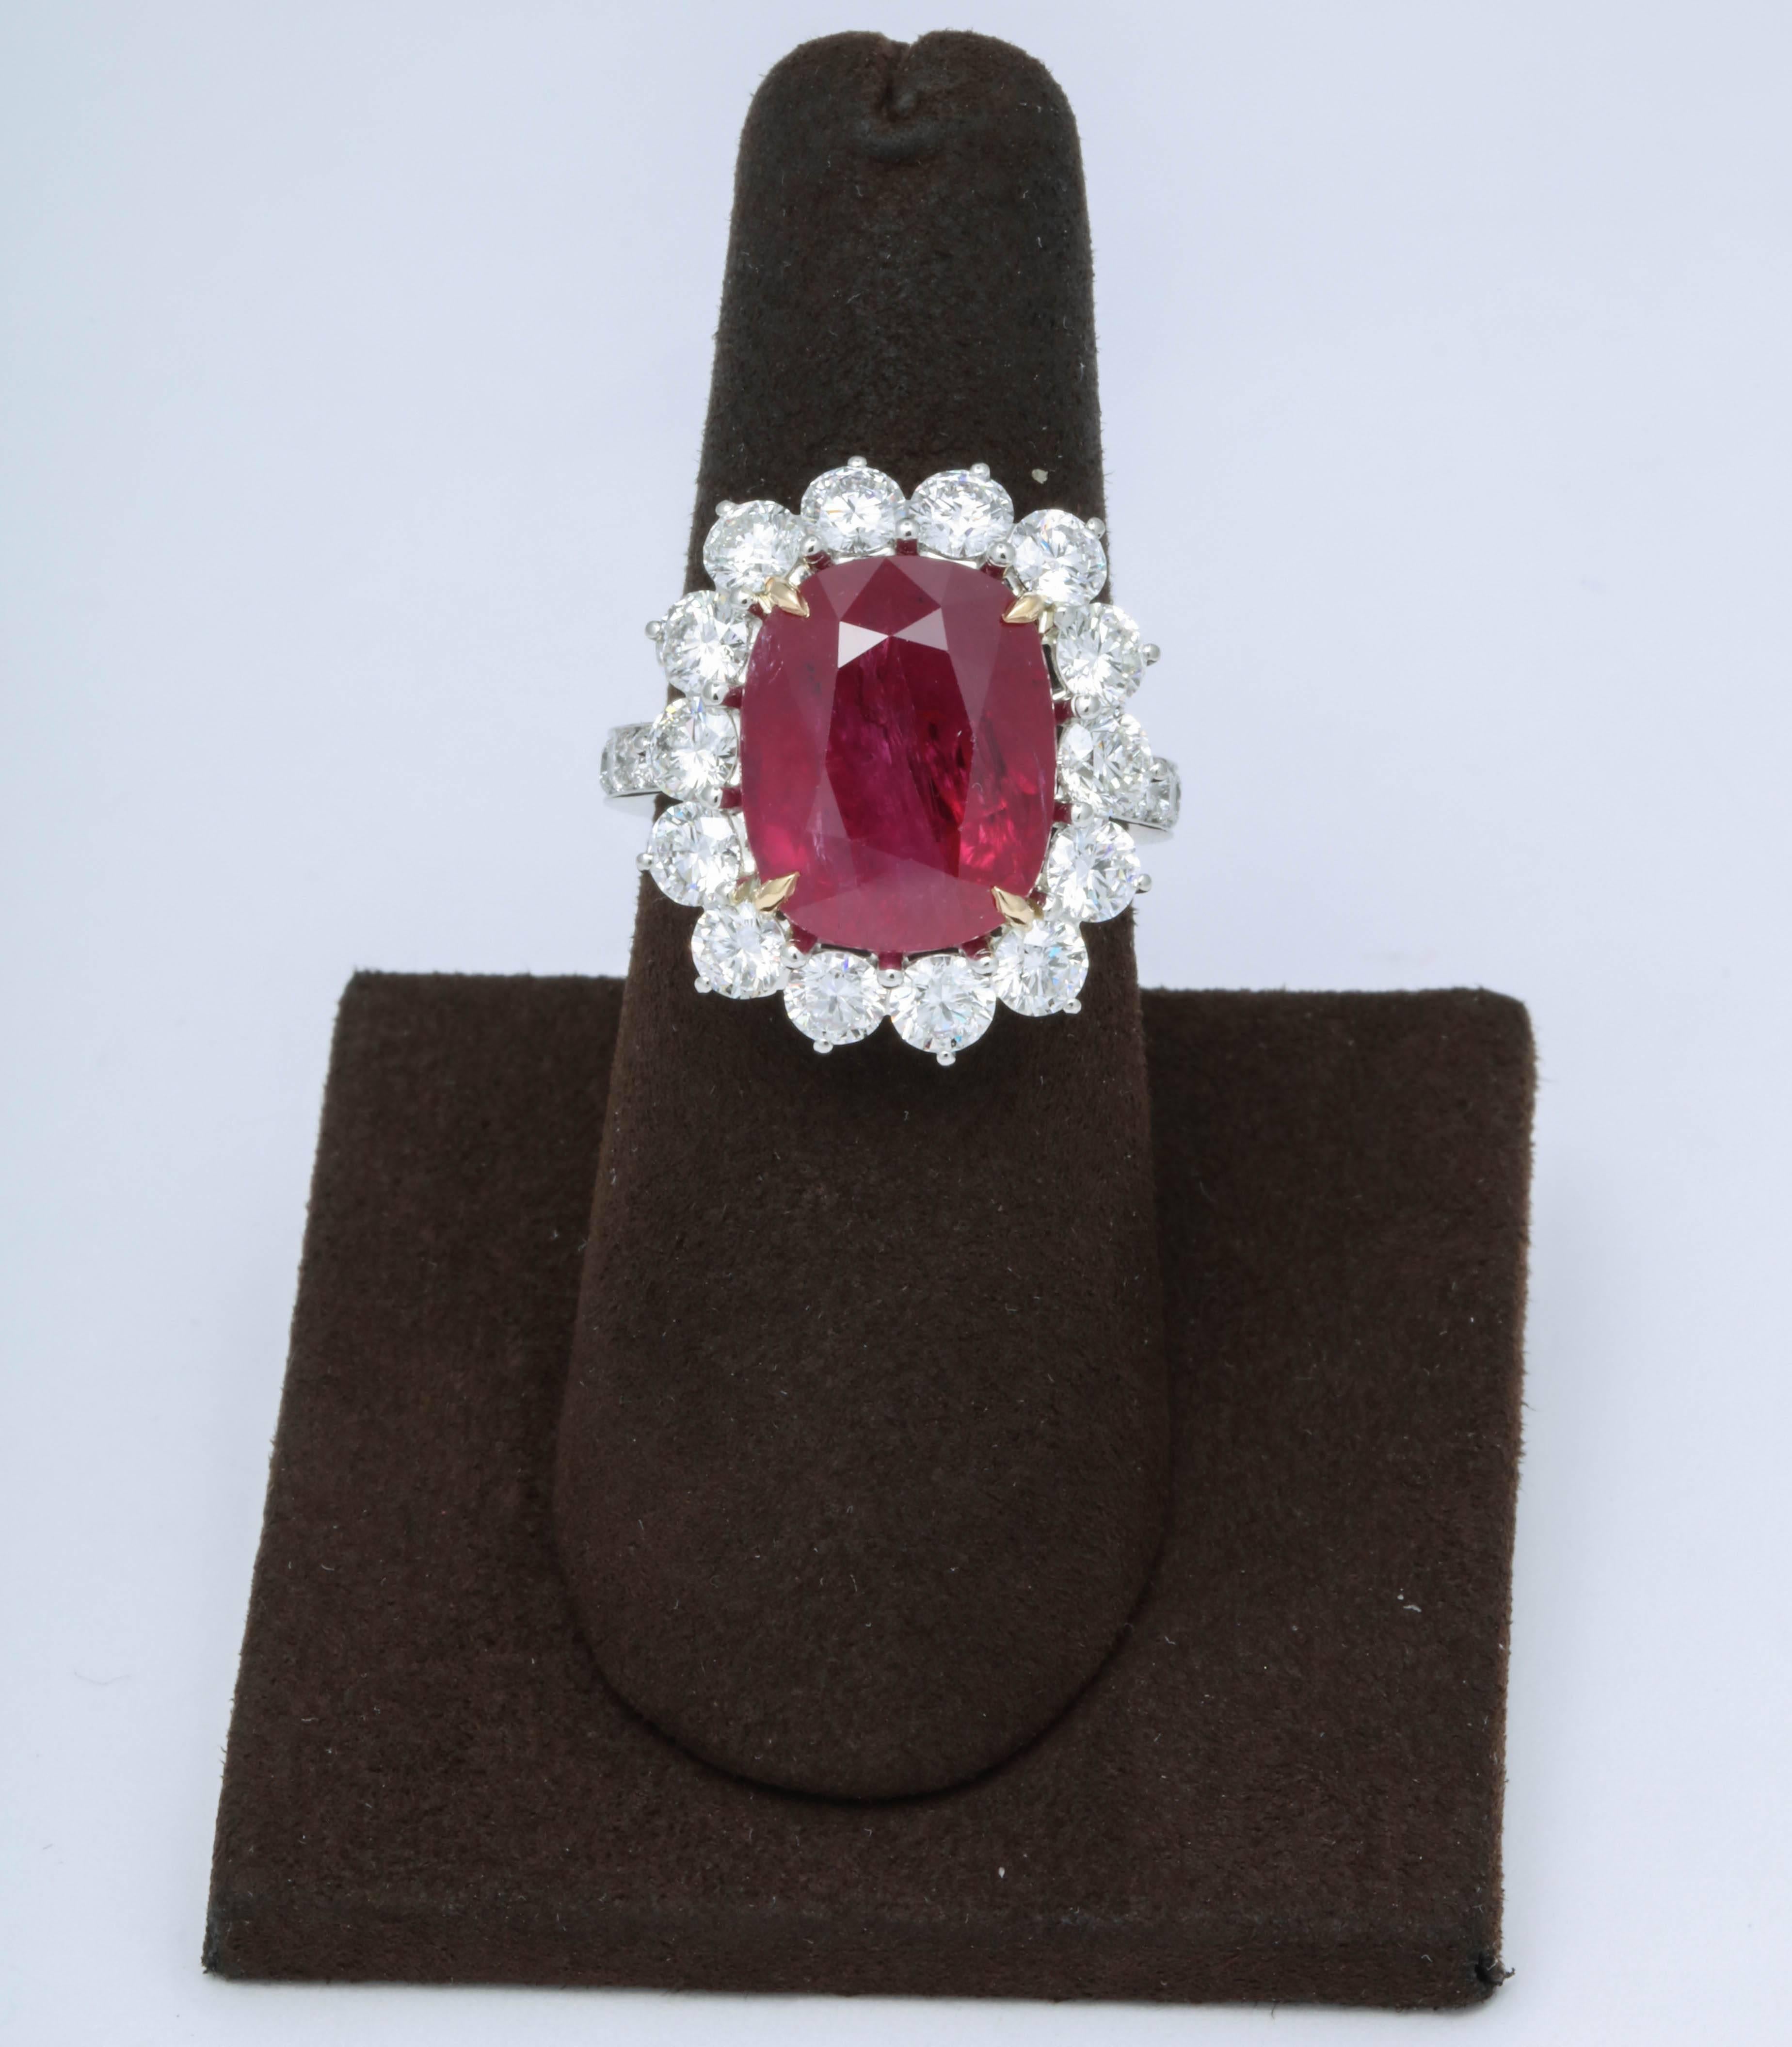 A FABULOUS Ruby and Diamond Cocktail Ring

This ring features a beautiful Cushion cut 